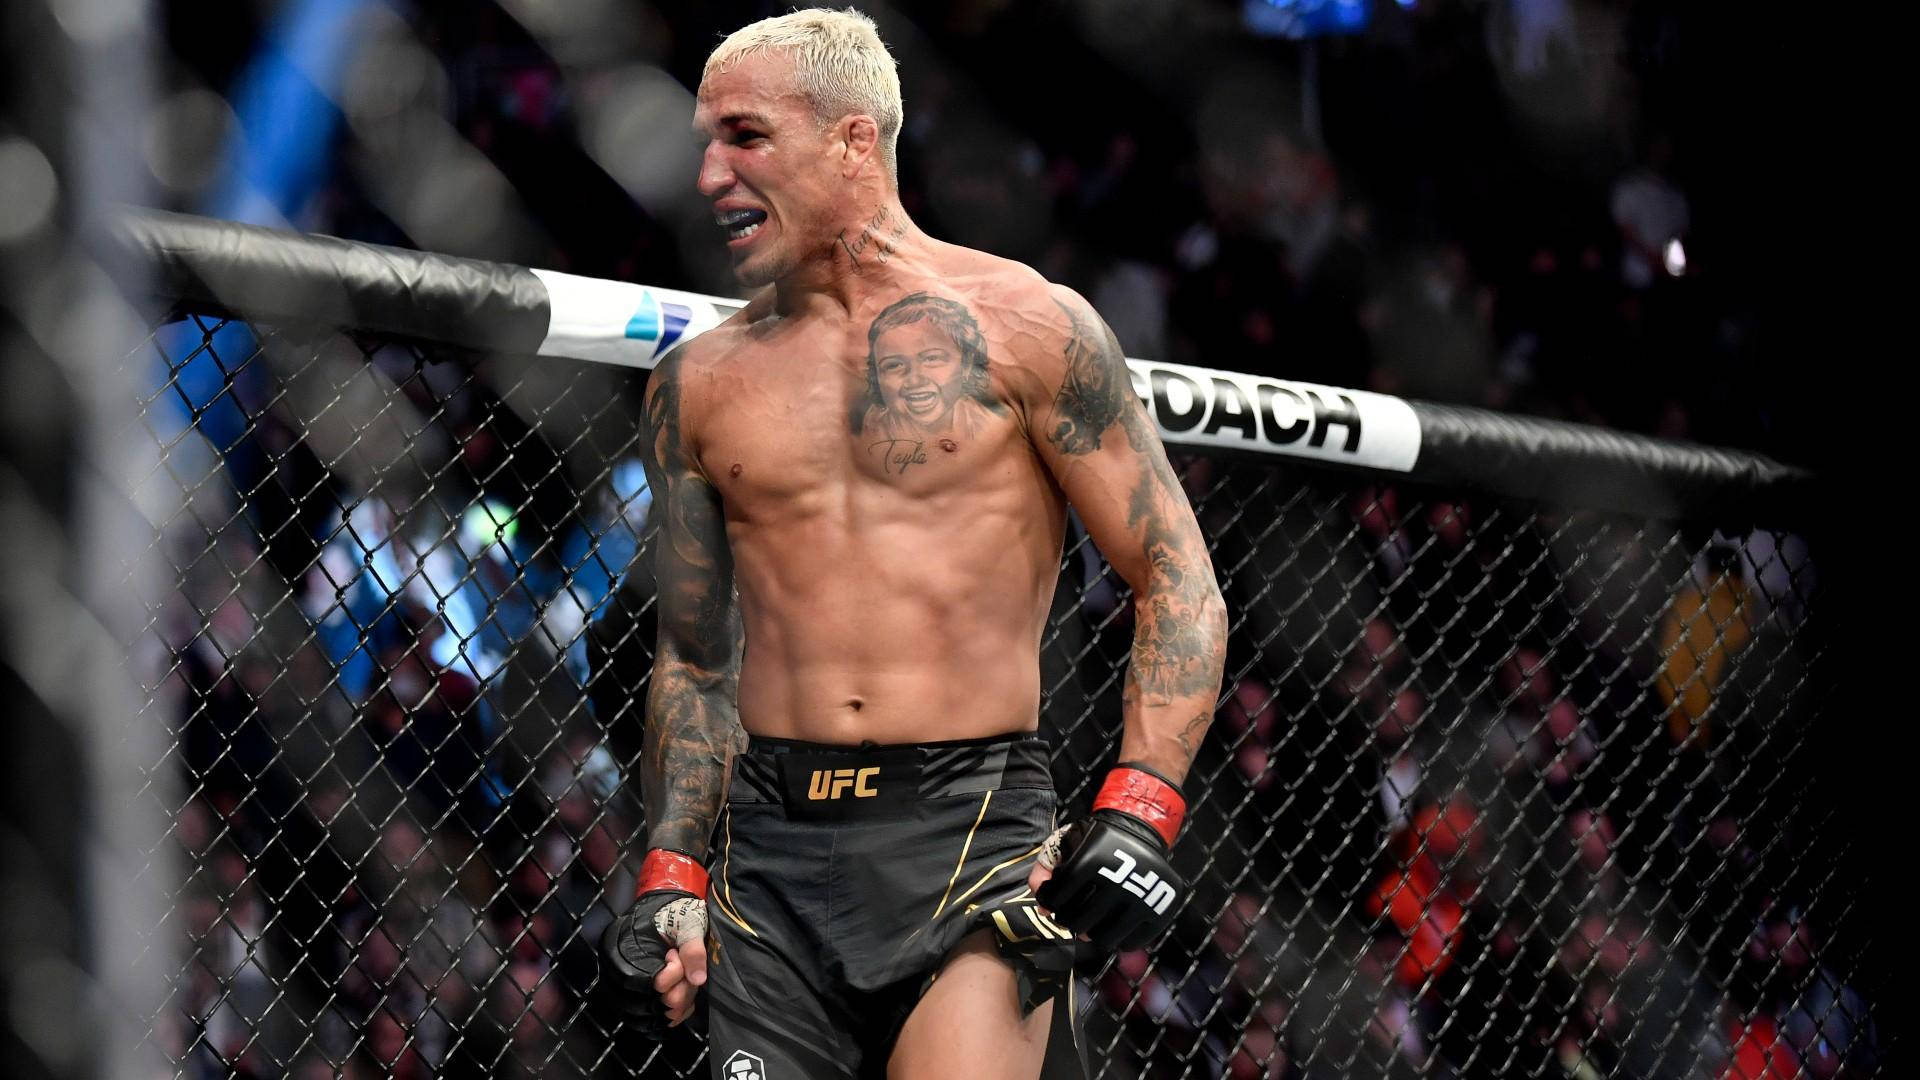 Charles Oliveira is at war all the time in gym and tough win over  Dustin Poirier not a shock for UFC stars coach  The Sun